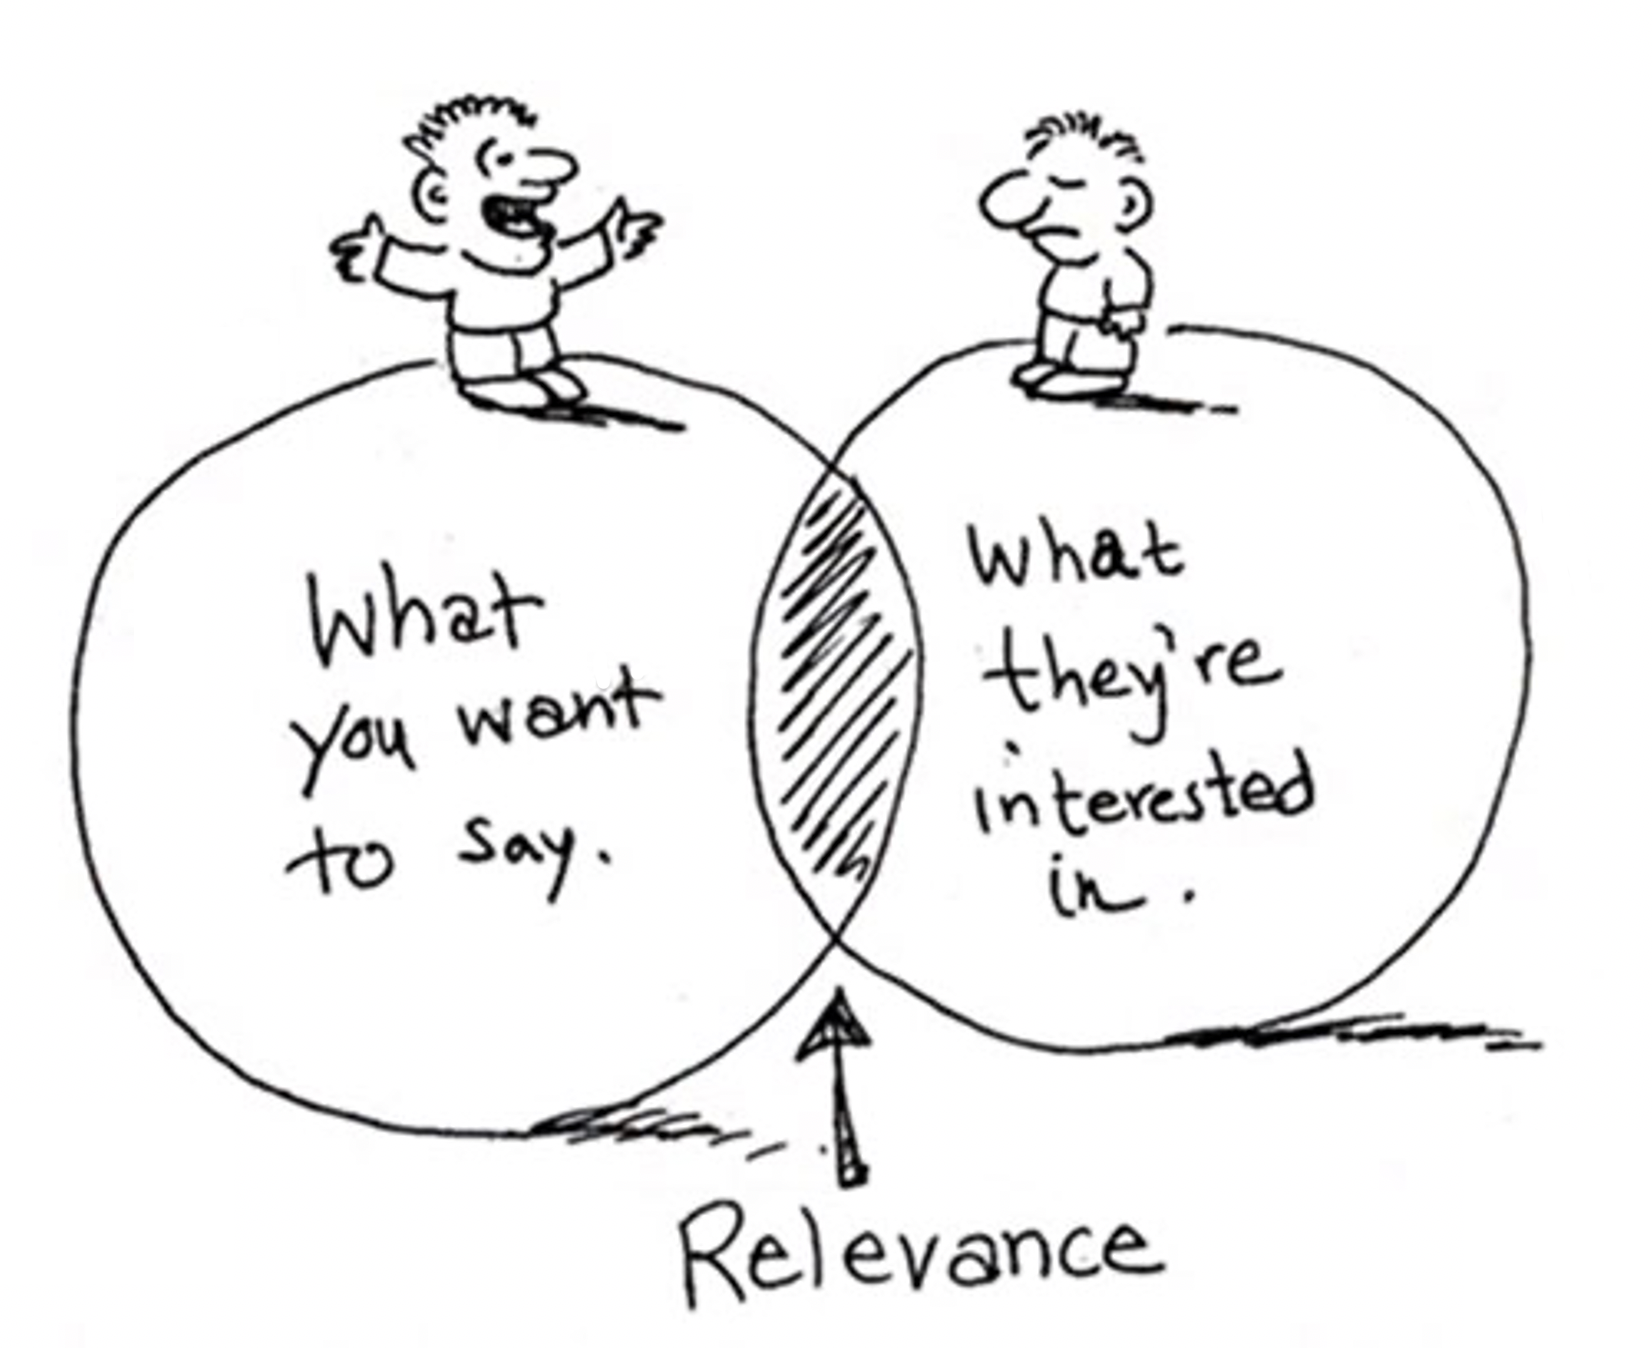 cartoon image with venn diagram of content relevance 